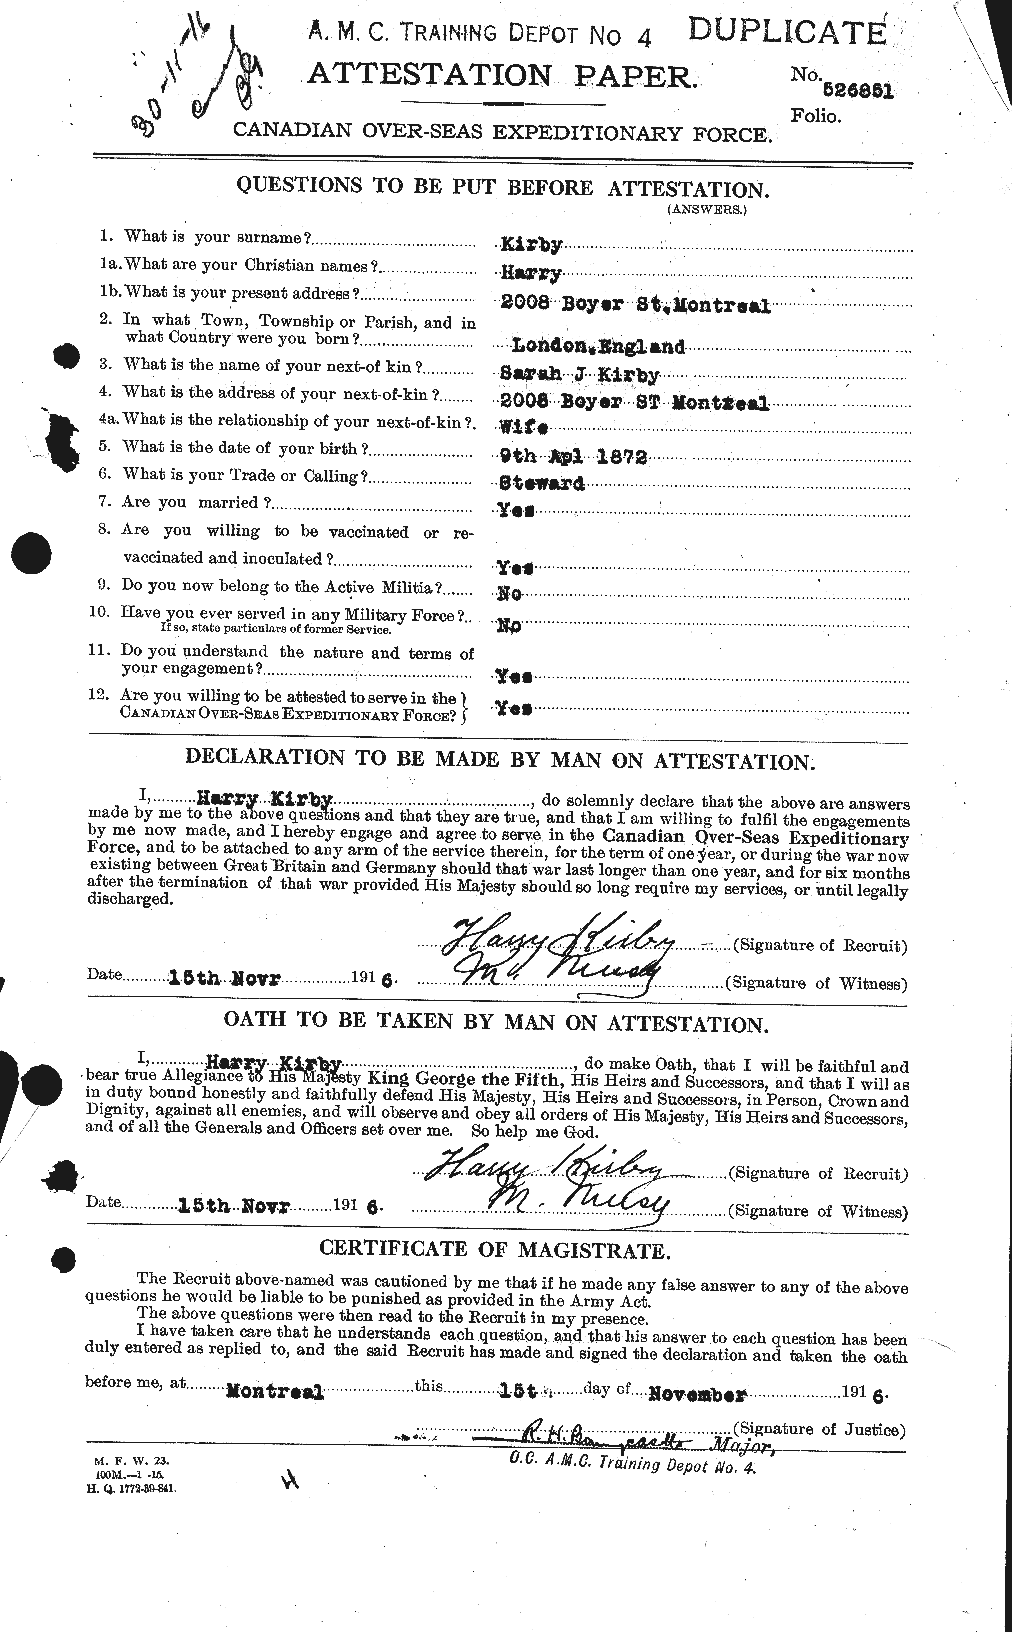 Personnel Records of the First World War - CEF 437209a